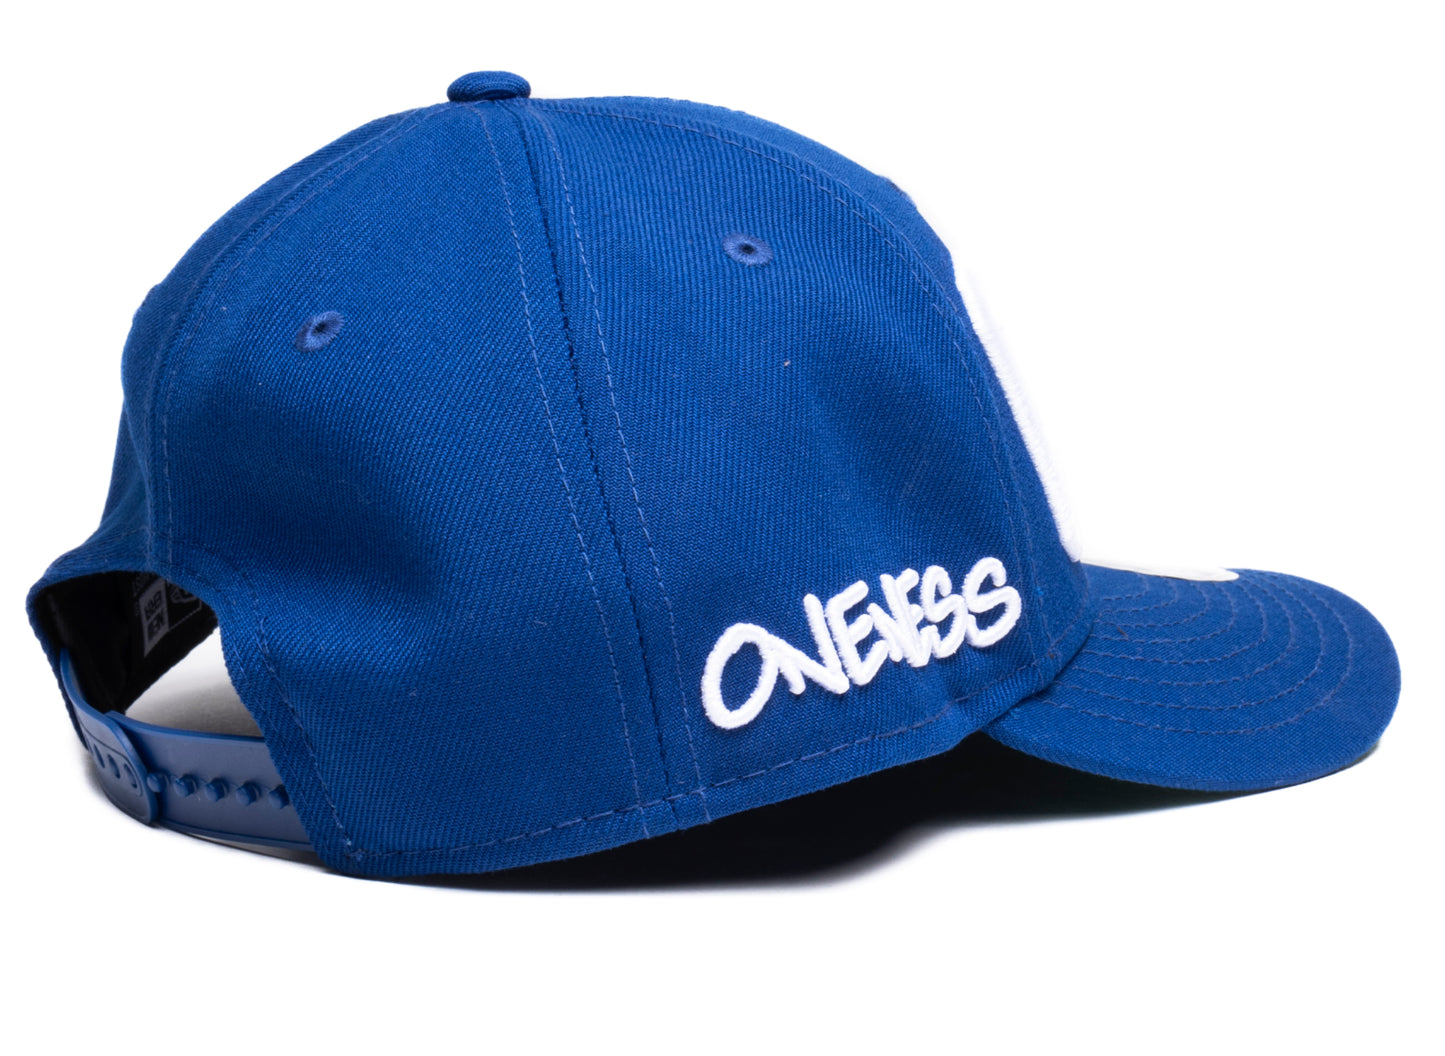 Oneness x New Era Snapback CATS Hat in Royal Blue/White